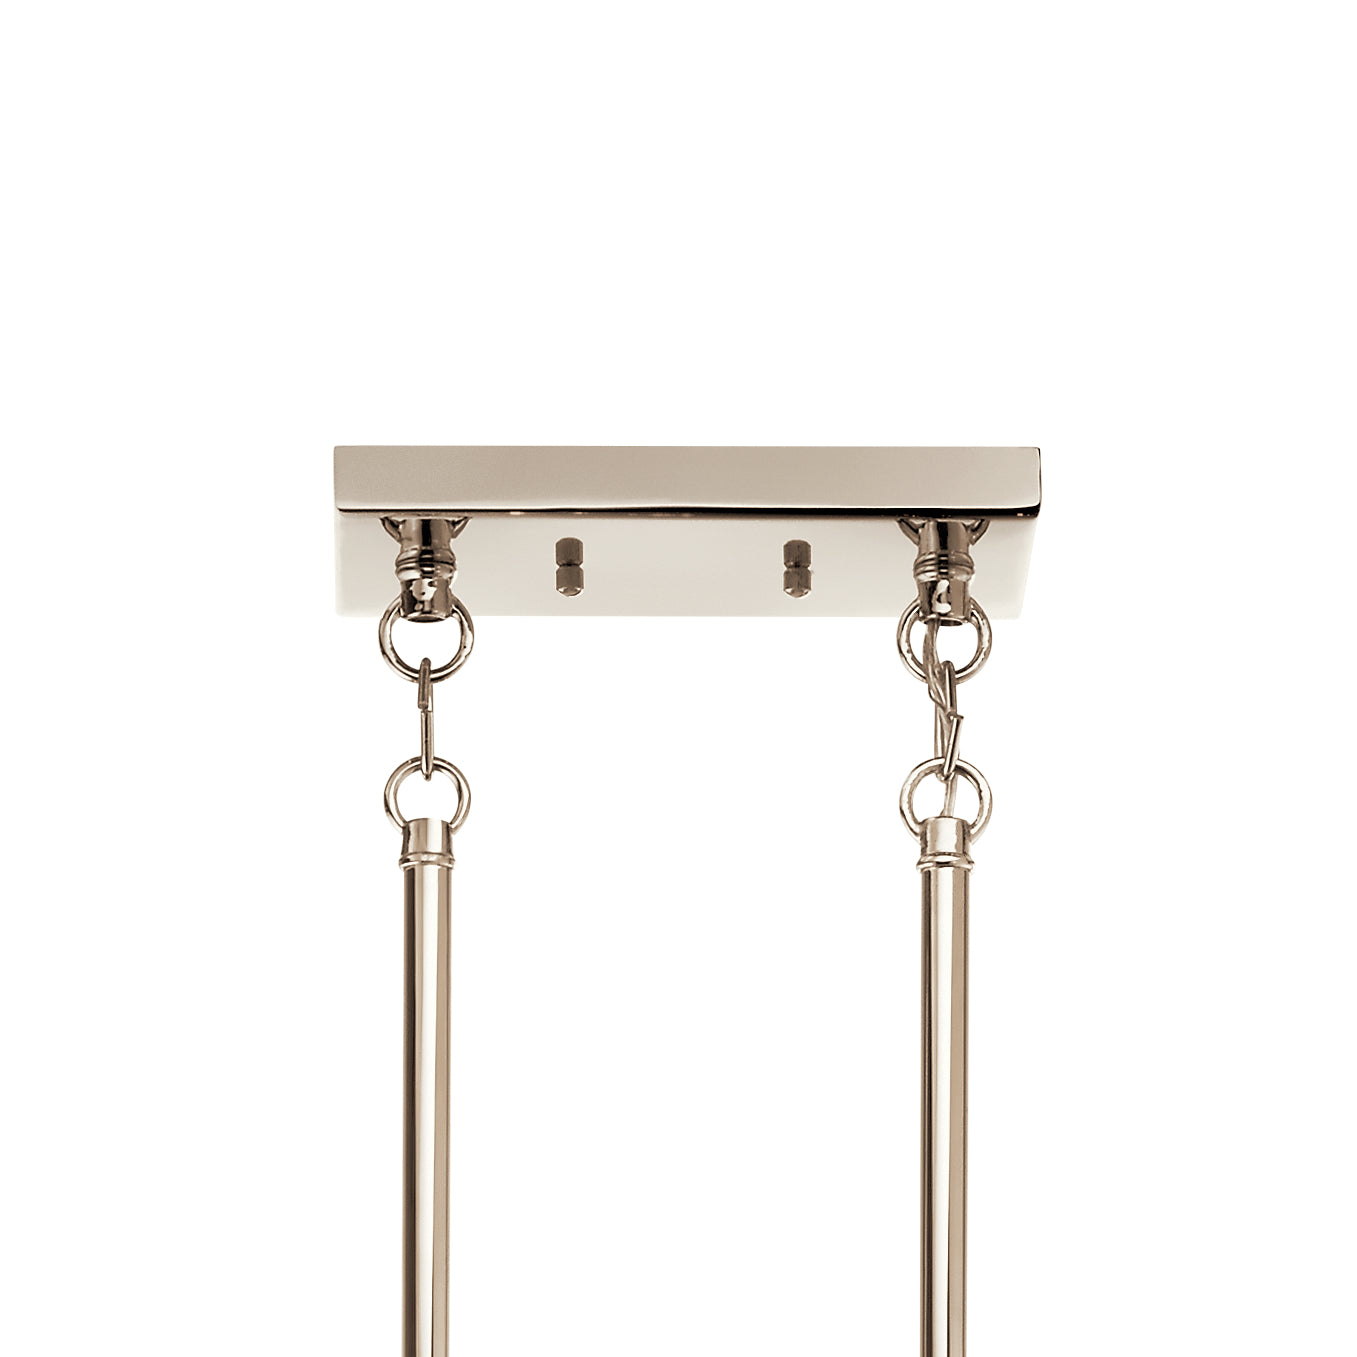 Cleara Linear Suspension Polished Nickel